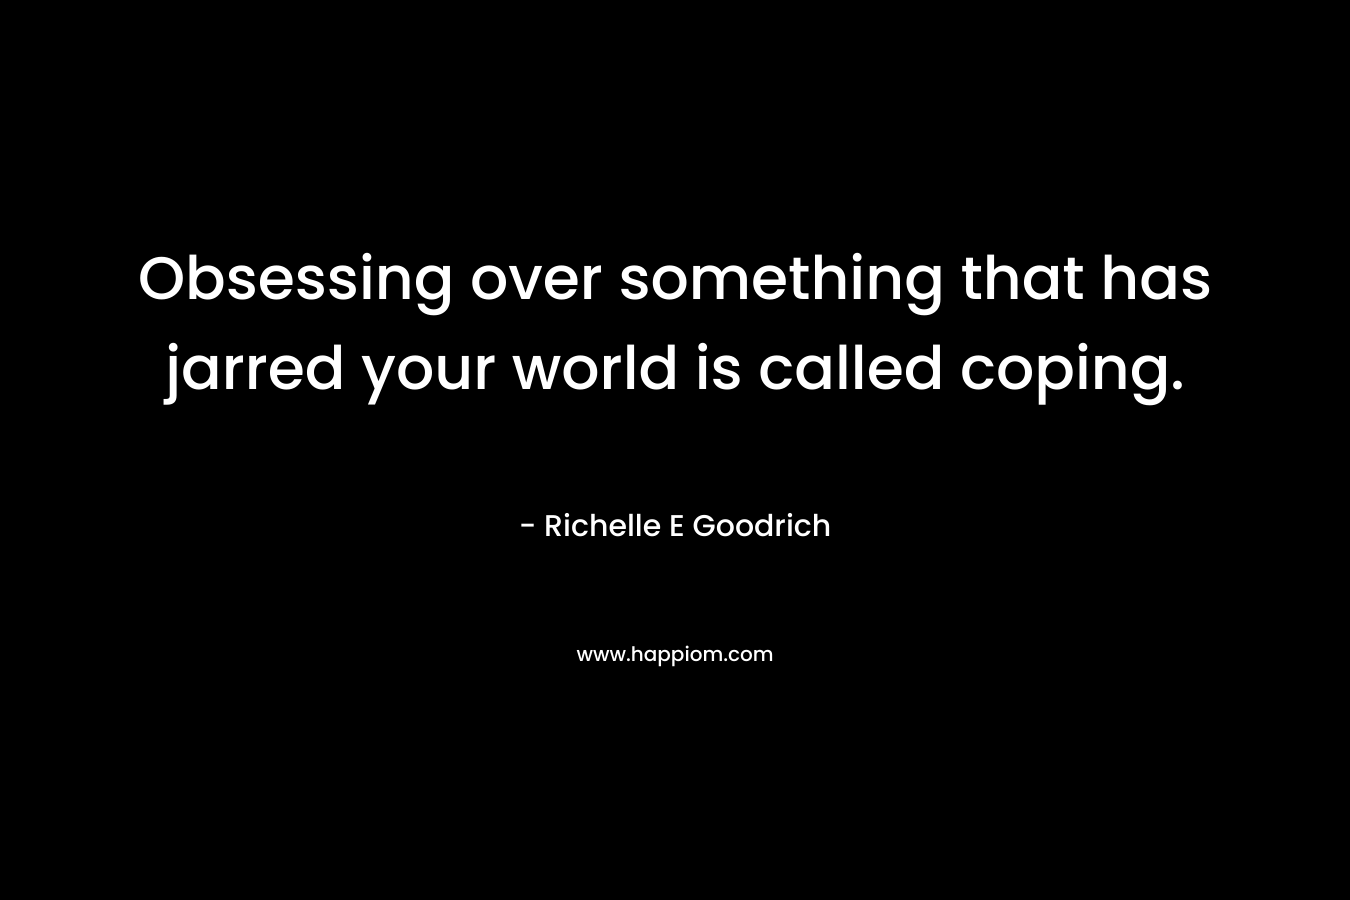 Obsessing over something that has jarred your world is called coping. – Richelle E Goodrich